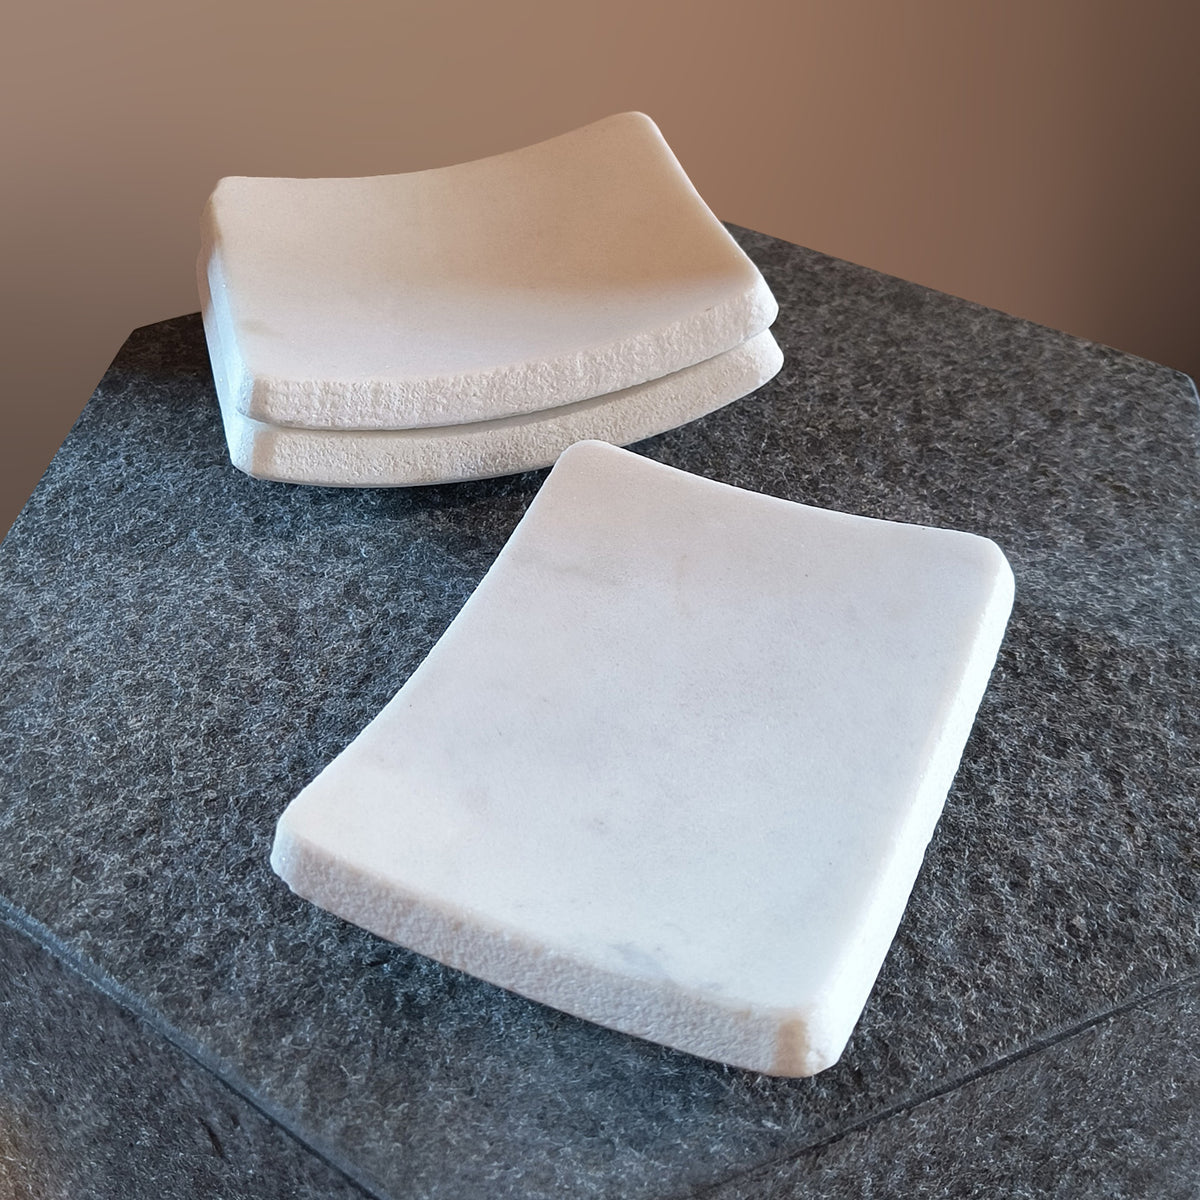 Stone Forest  rectangular soap dishes in White Marble are polished smooth. 6